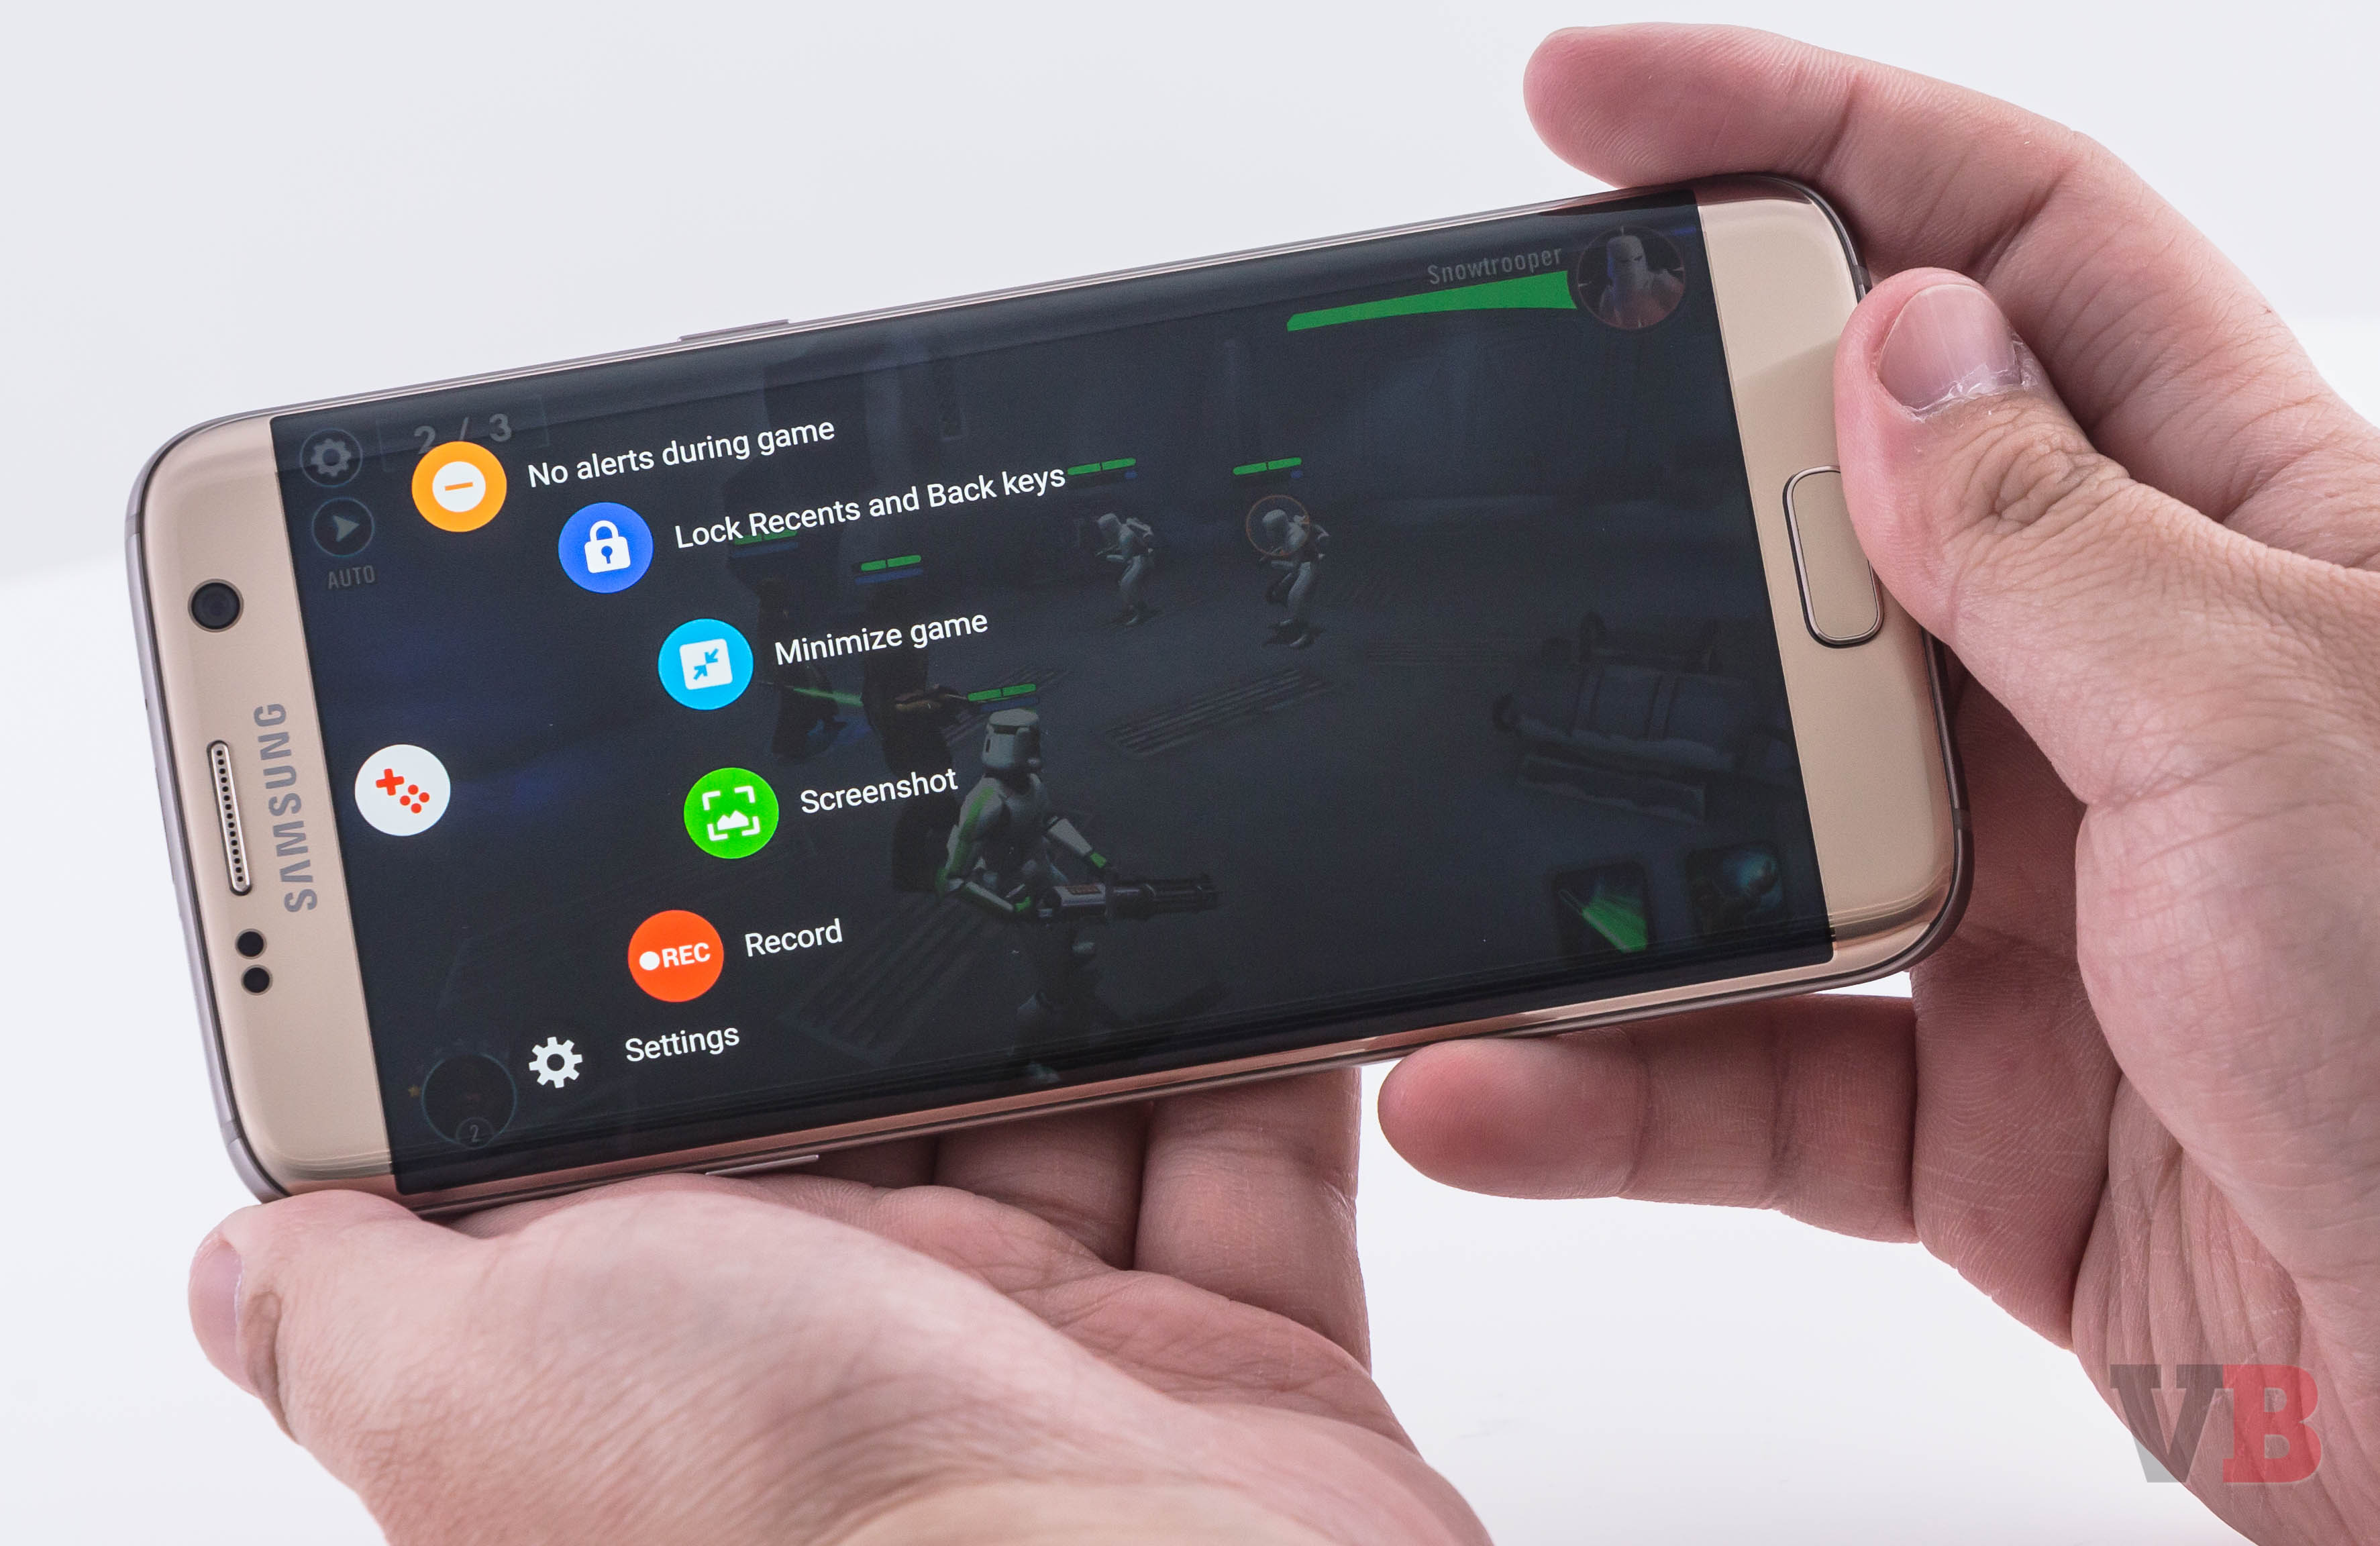 Samsung's Galaxy S7 and S7 edge smartphones comes equipped with its Game Launcher to make playing more interactive.